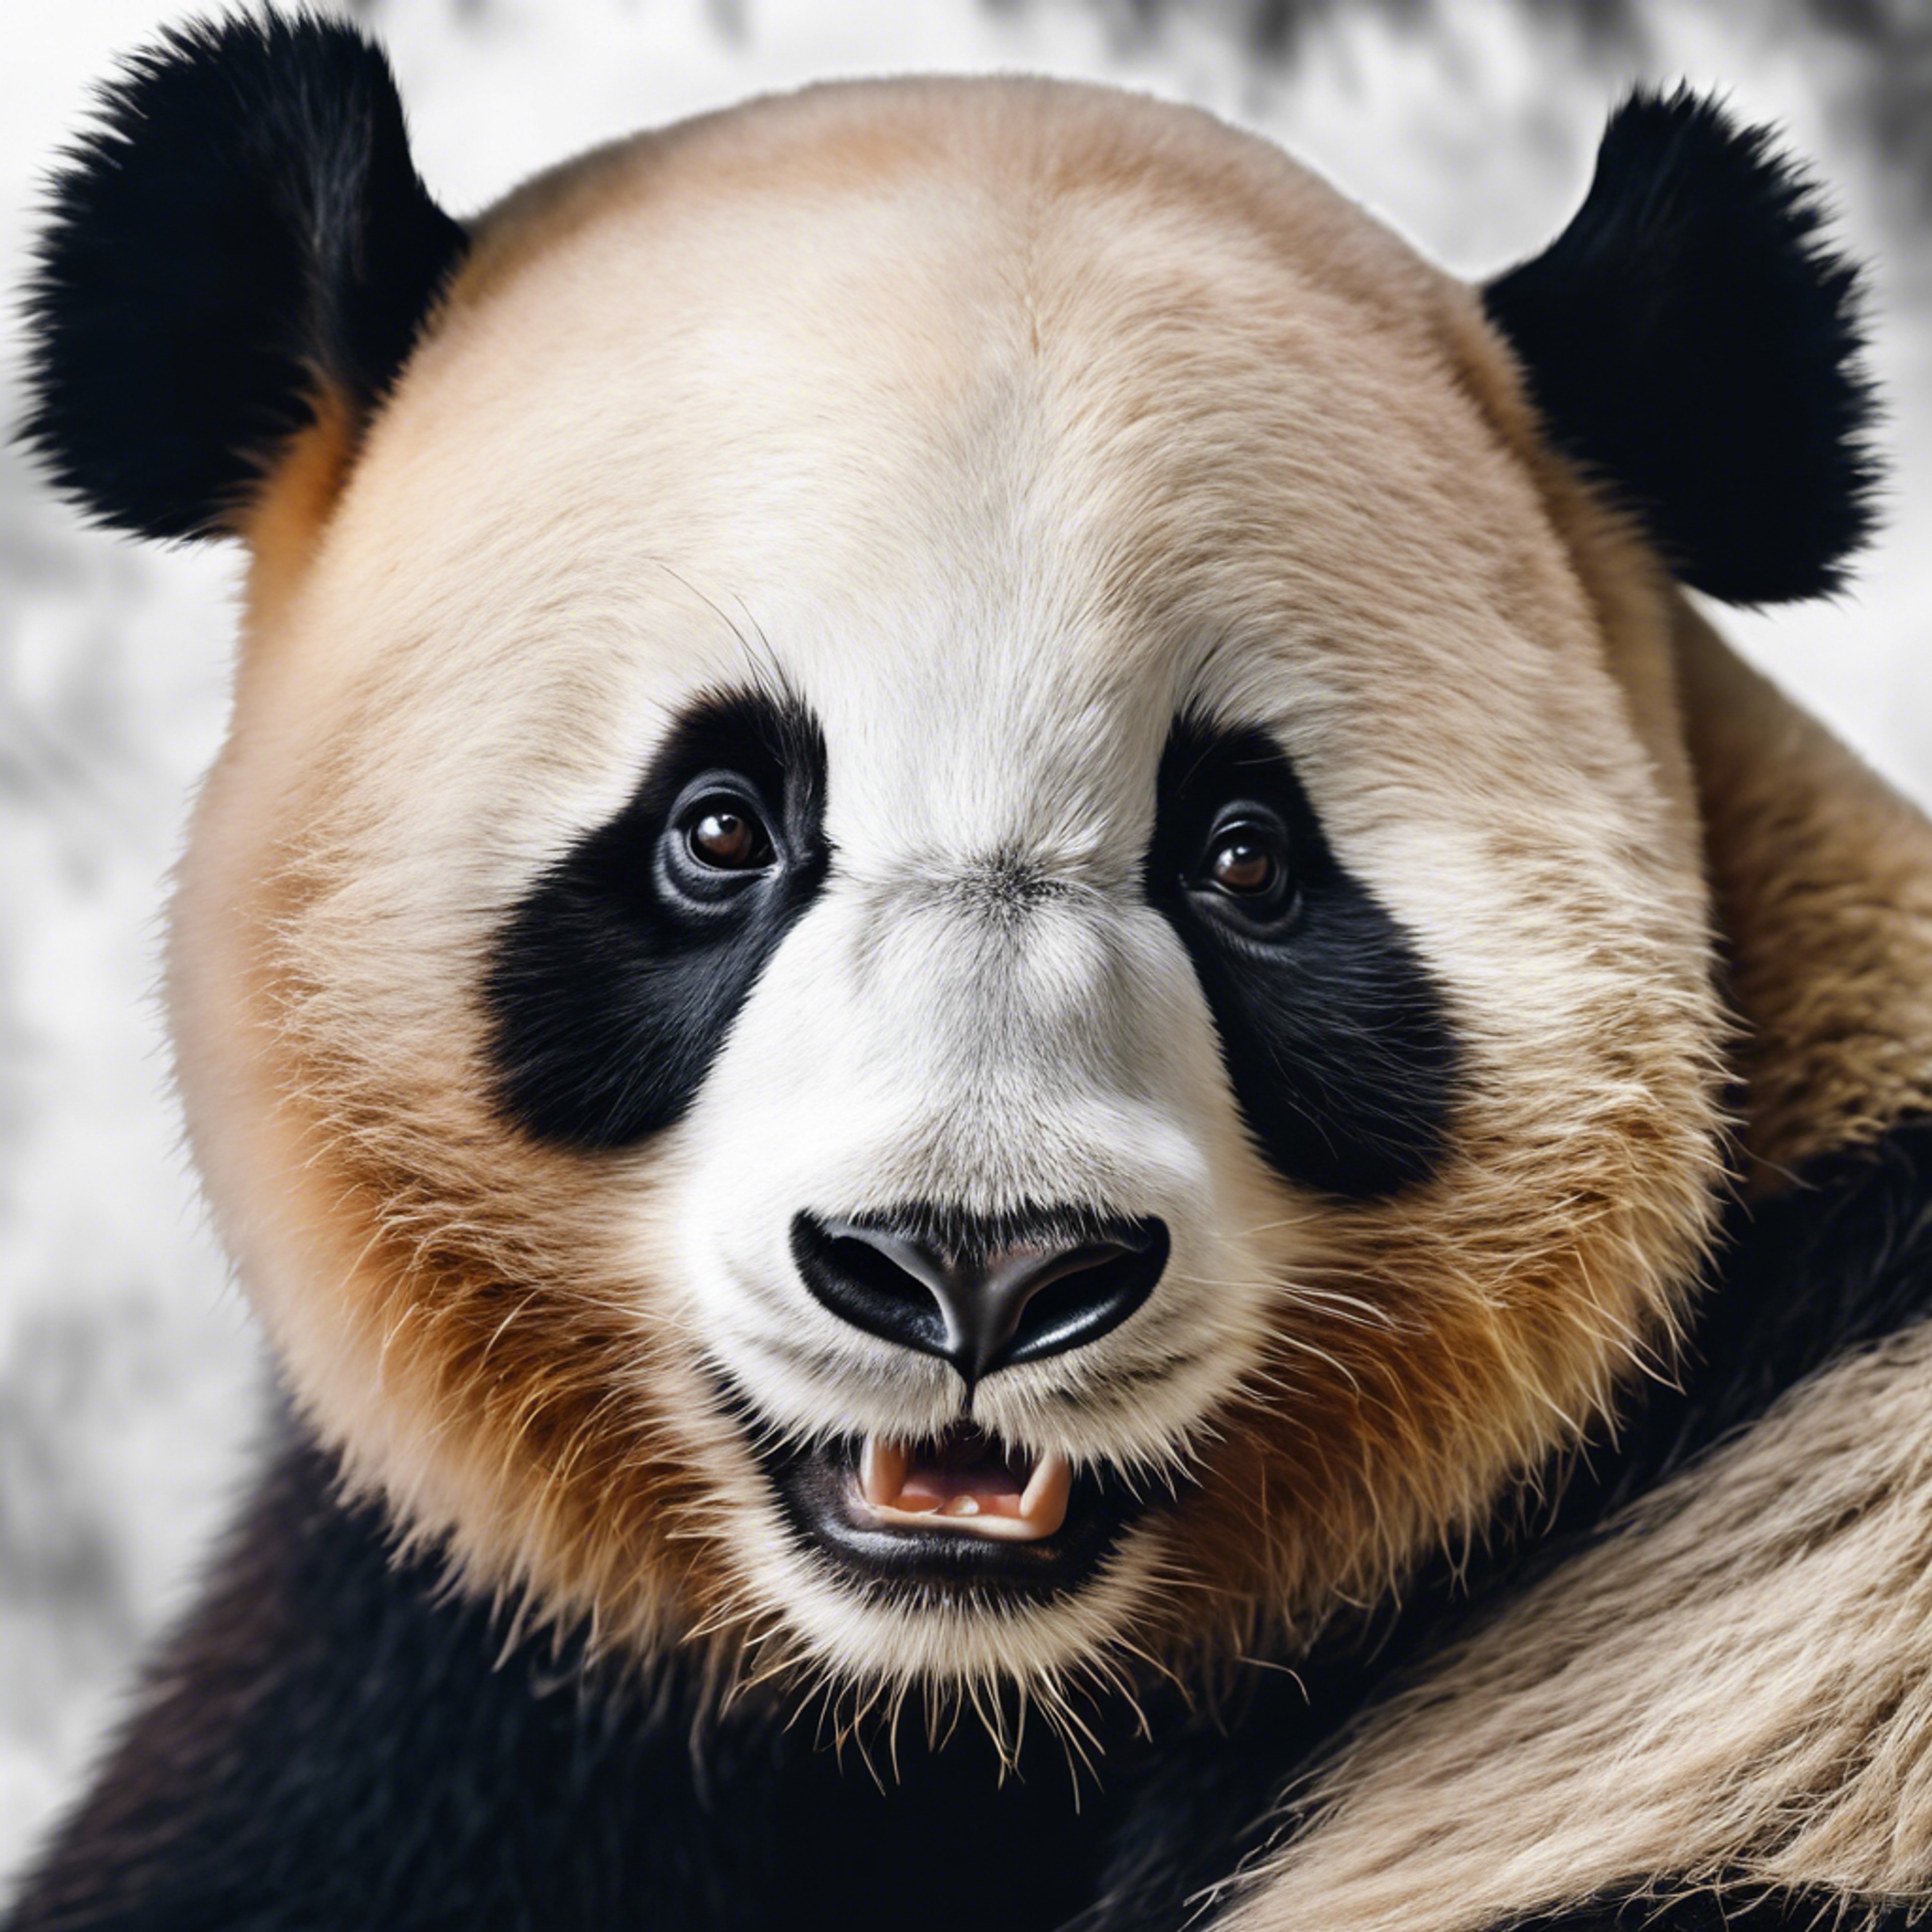 A close-up portrait of a smiling panda, showcasing the joy and charm of this magnificent creature. Hình nền[5b22781787714e61bfbc]